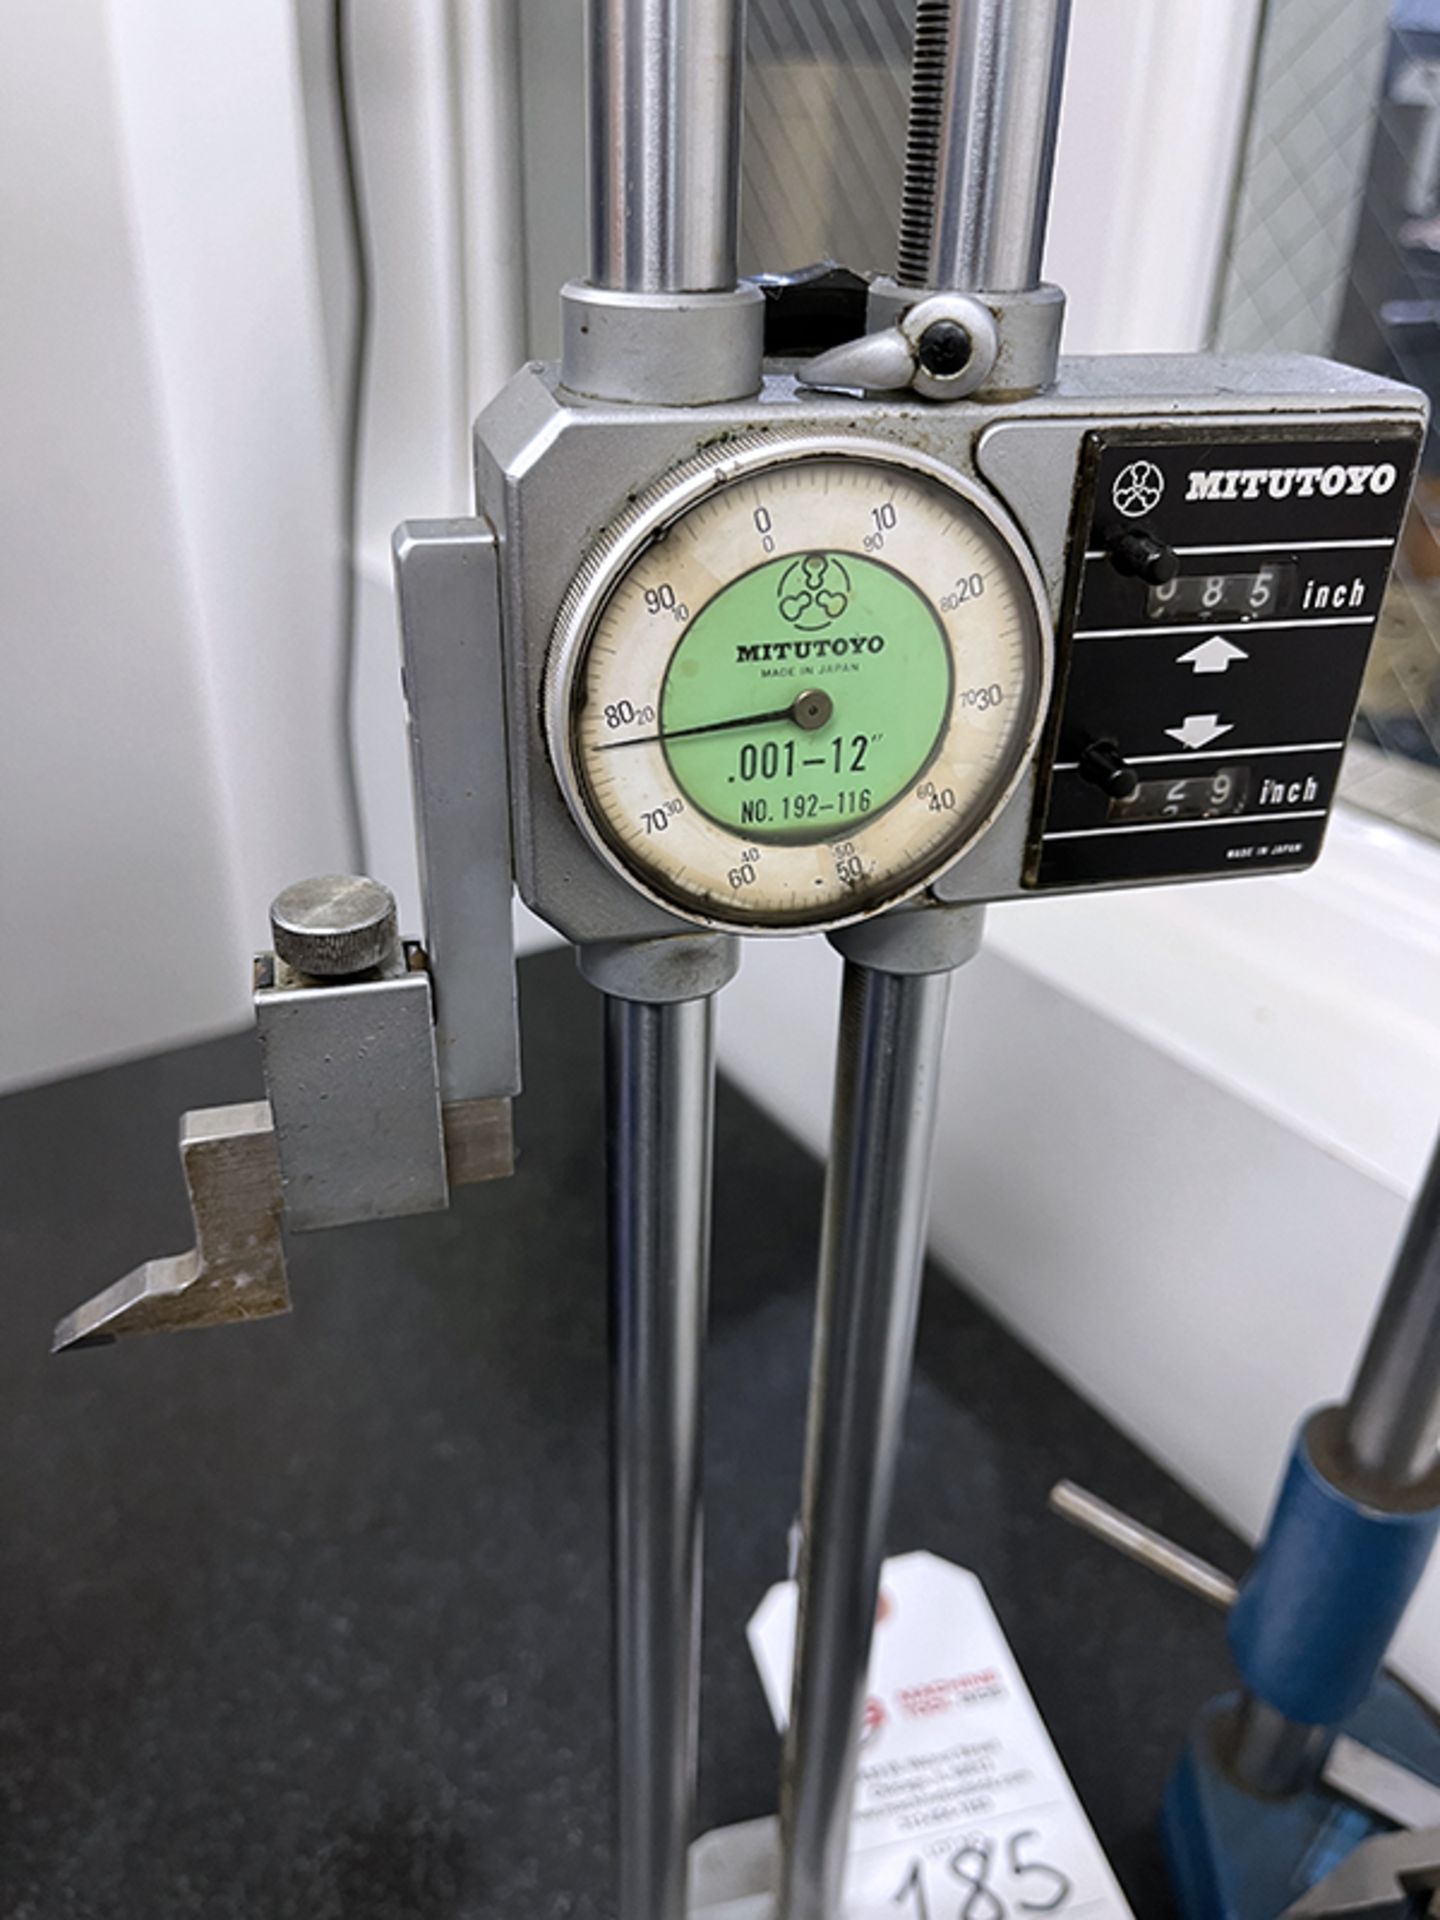 .001"-12" Mitutoyo Height Gage - Image 3 of 6